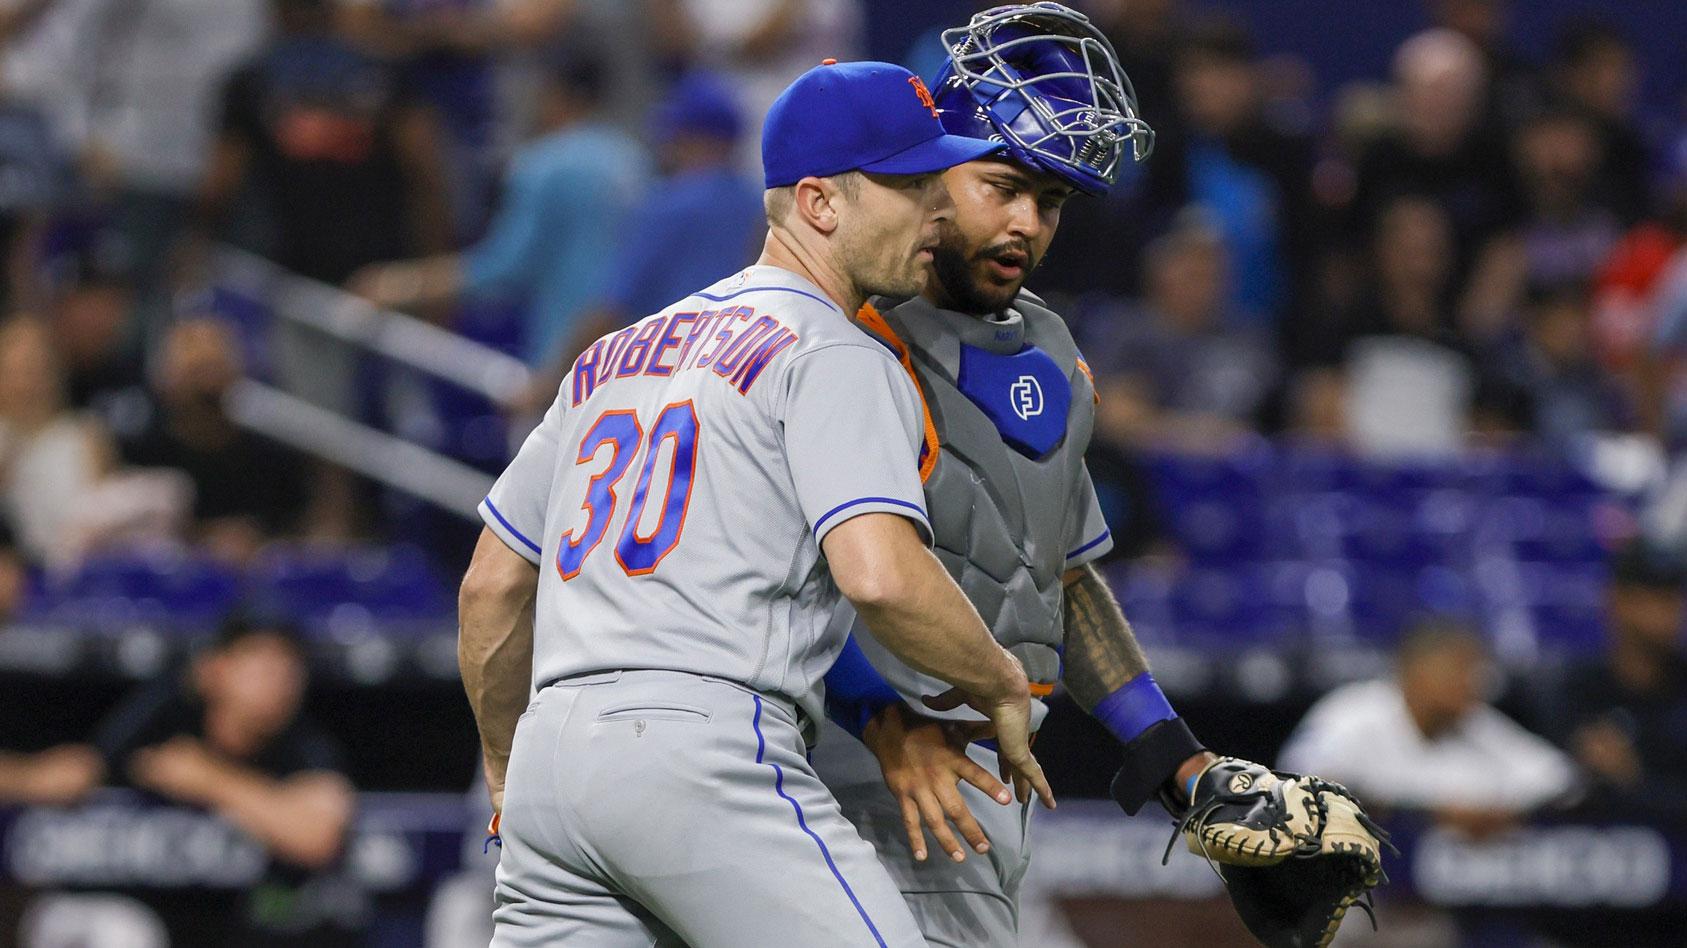 Mar 30, 2023; Miami, Florida, USA; New York Mets relief pitcher David Robertson (30) celebrates with catcher Omar Narvaez (2) after winning the game against the Miami Marlins at loanDepot Park. / Sam Navarro-USA TODAY Sports